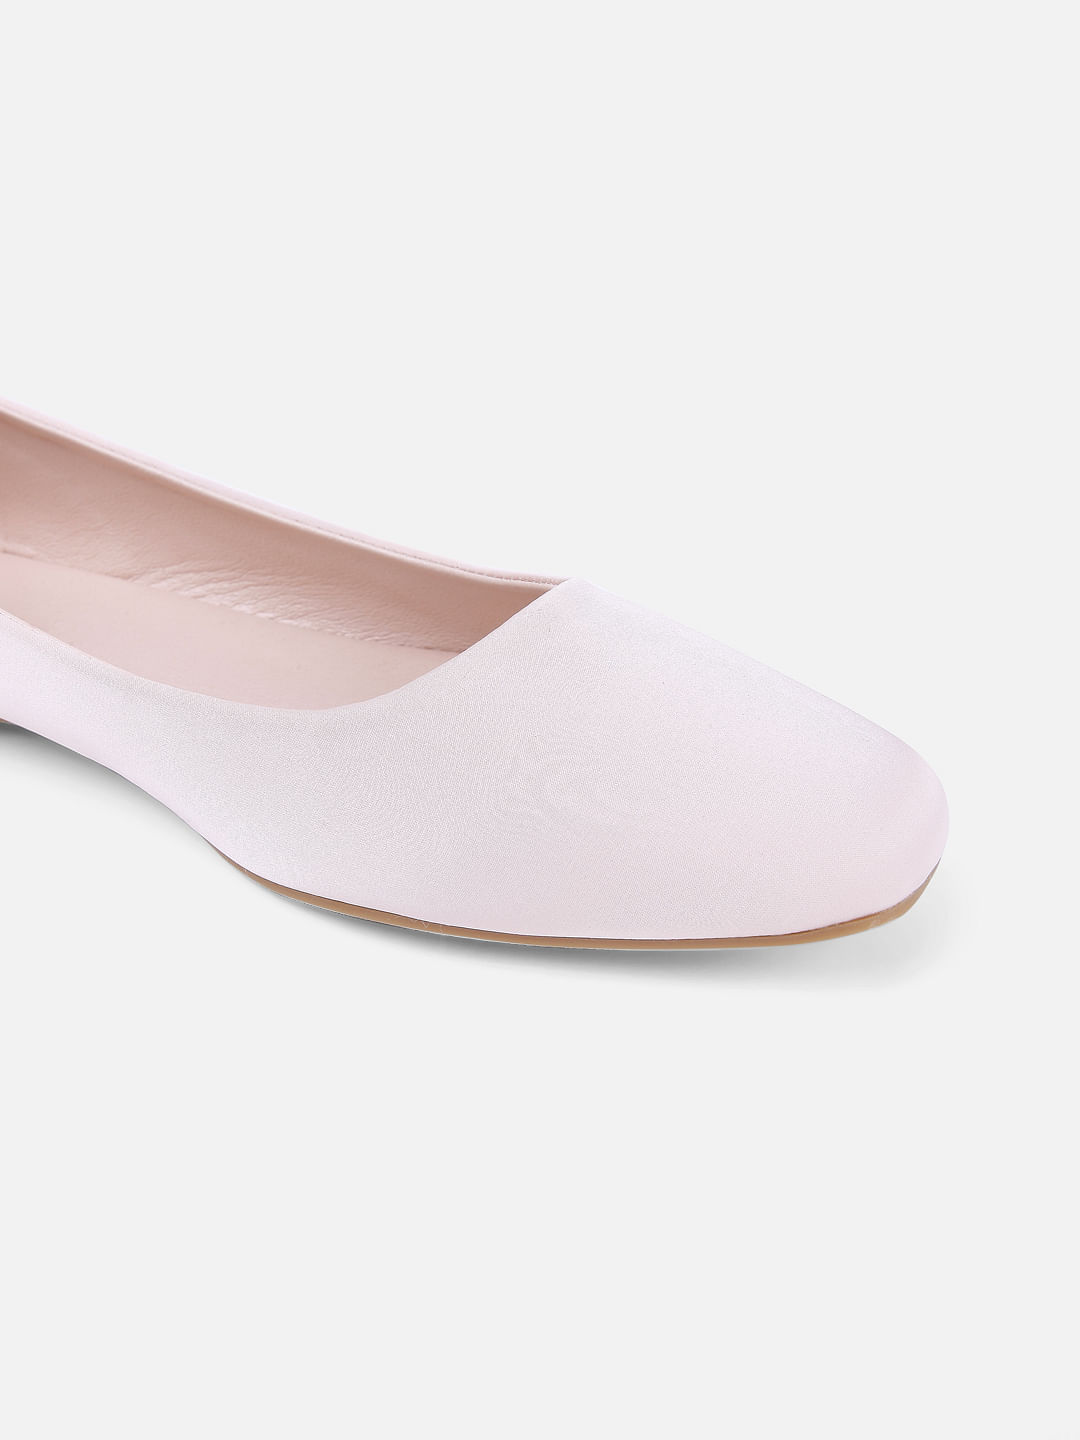 These Mesh Ballet Flats Feel Like Walking on Air - Fashionista